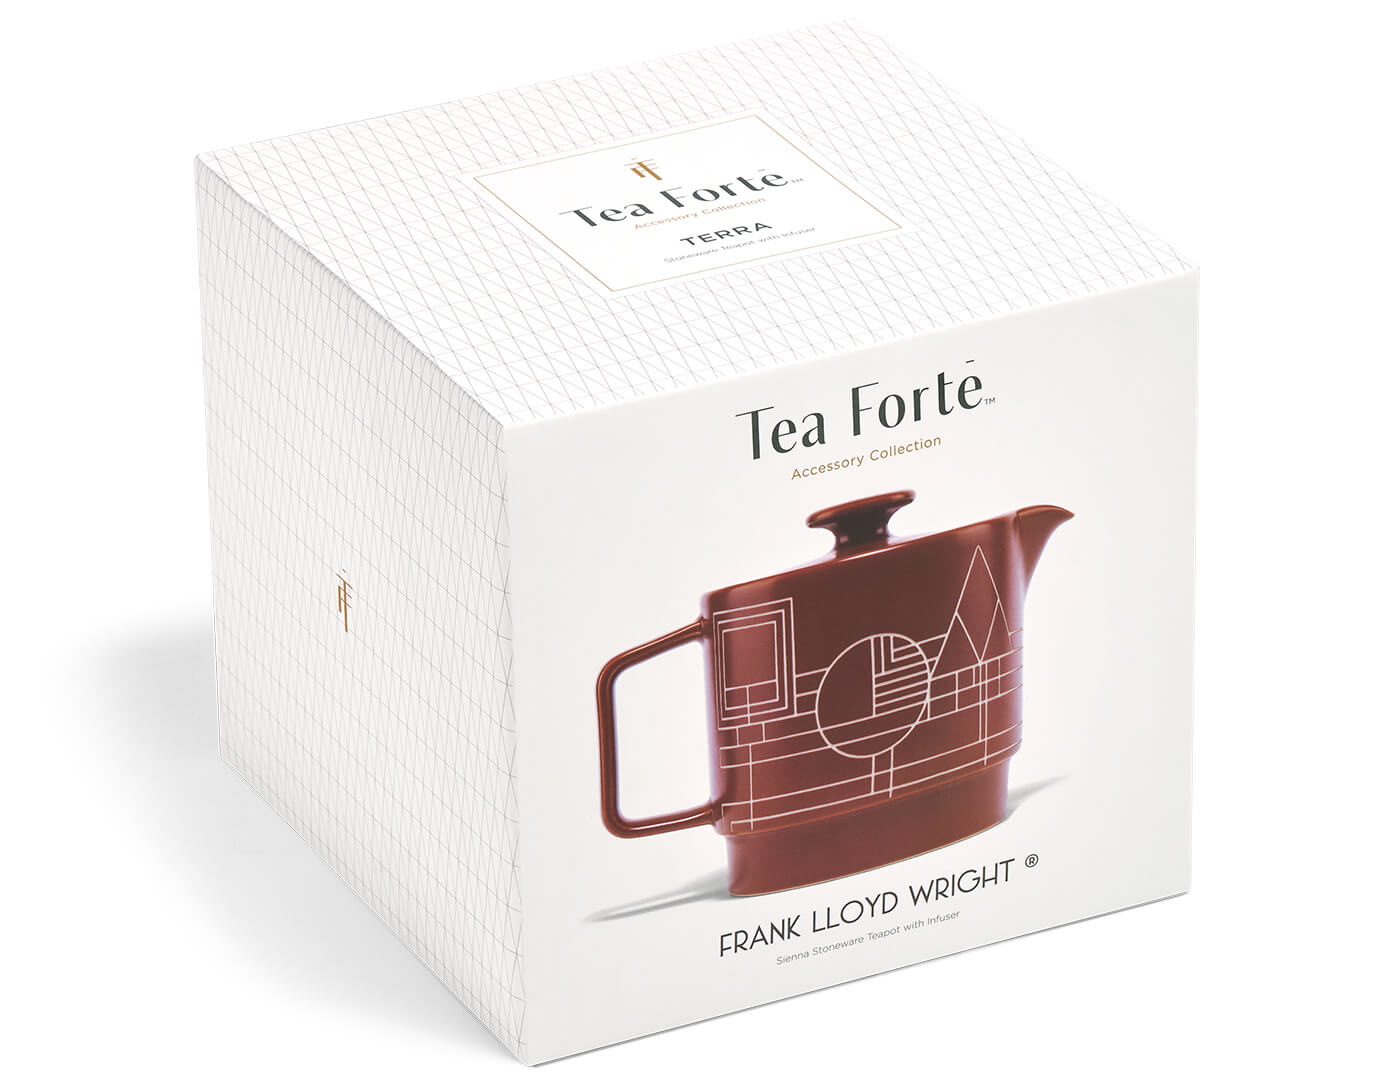 Terra stoneware teapot with infuser box